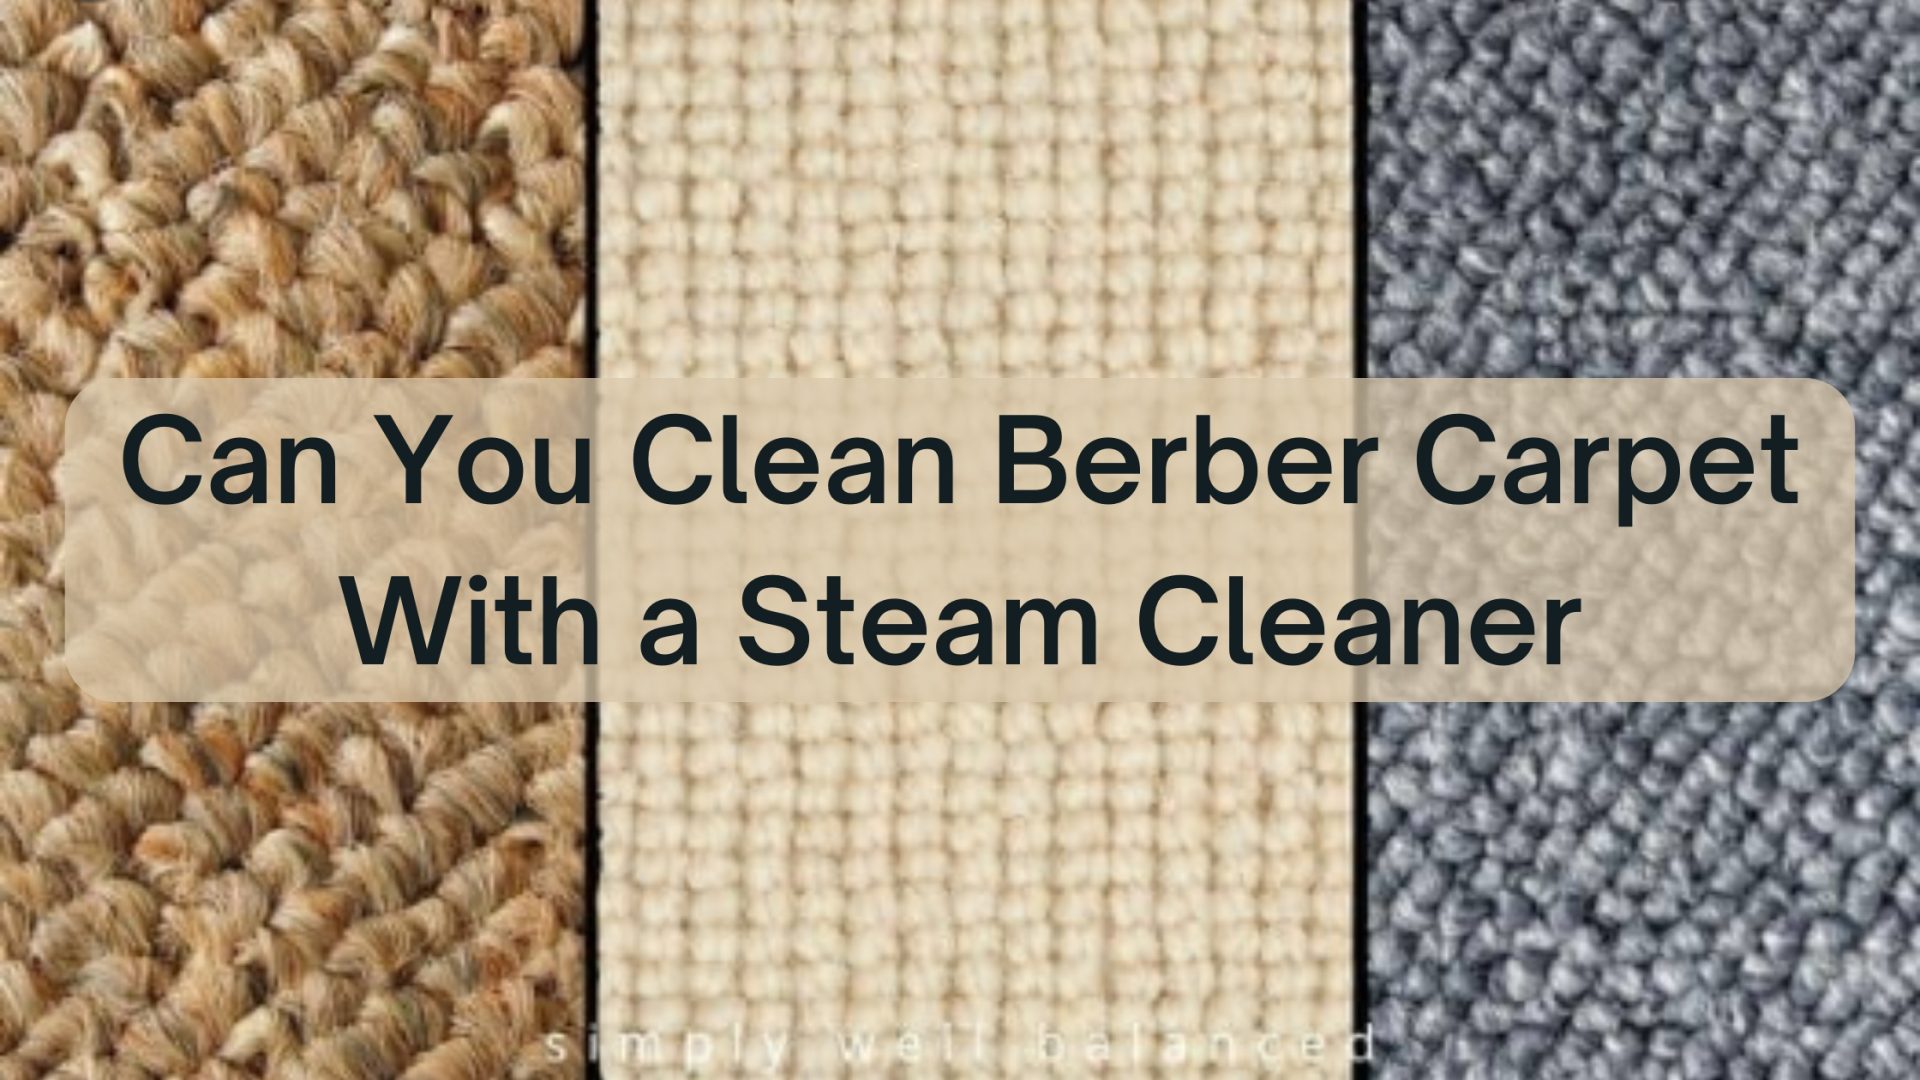 Can You Clean Berber Carpet With a Steam Cleaner